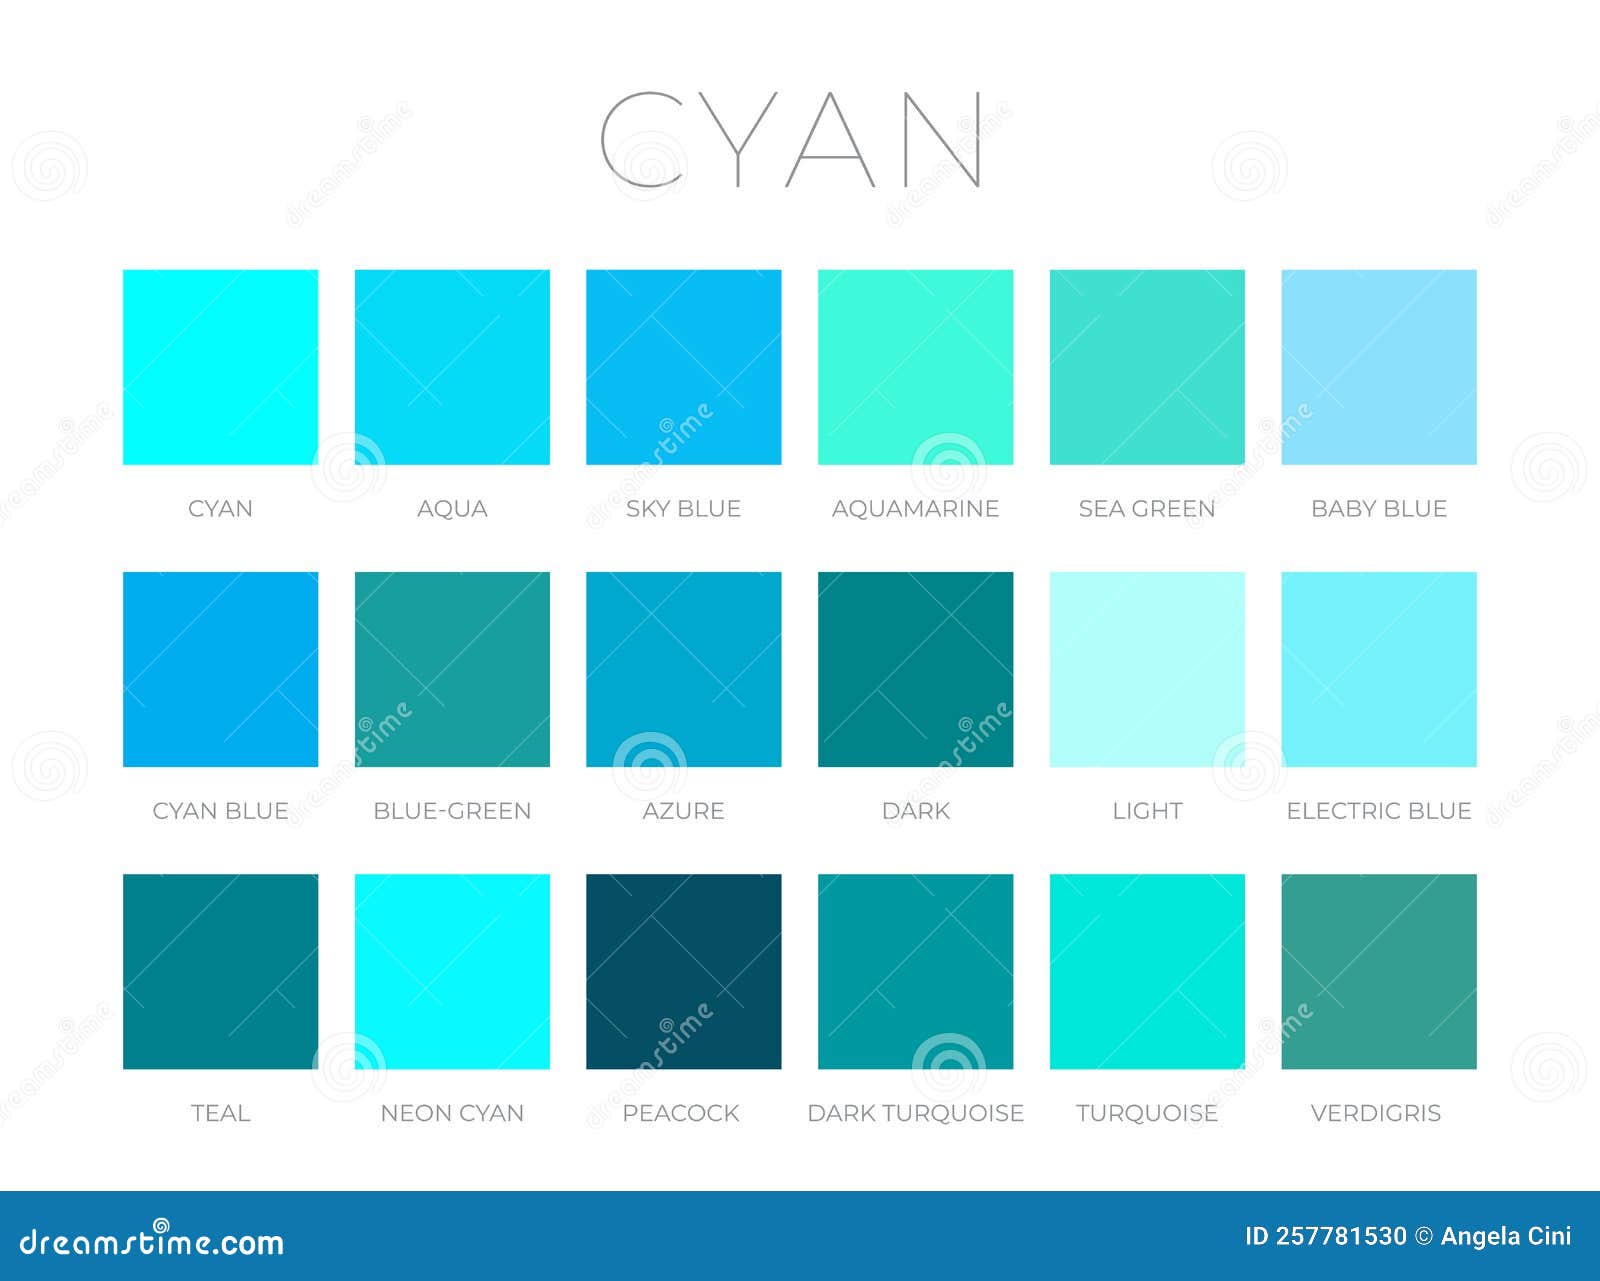 Cyan Blue Color Shades Swatches Stock Vector - Illustration of